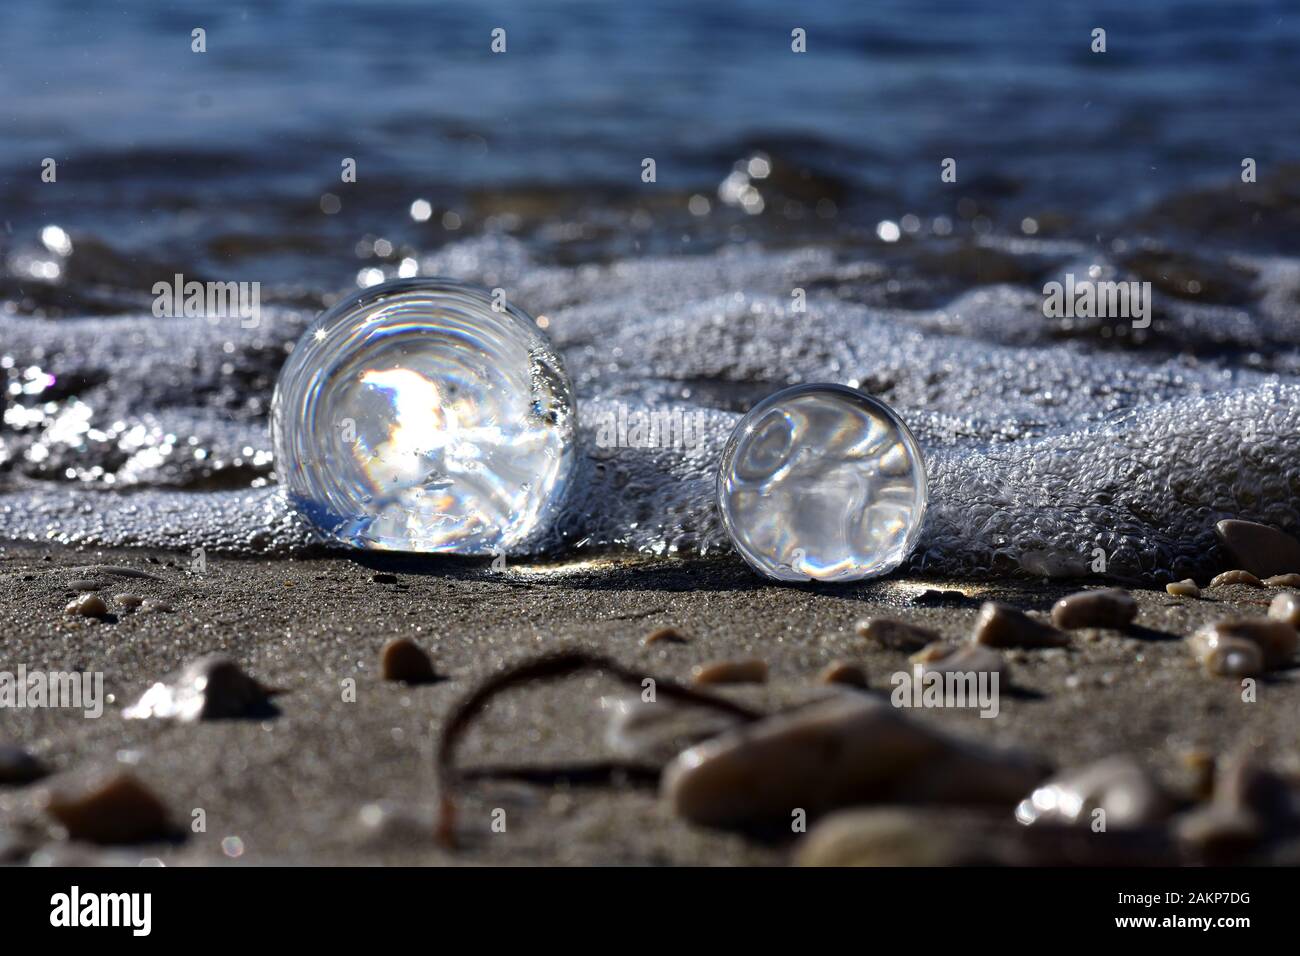 Beautiful transparent glass balls at the beach flips the view upside down/ beautiful landscape nature photography Stock Photo